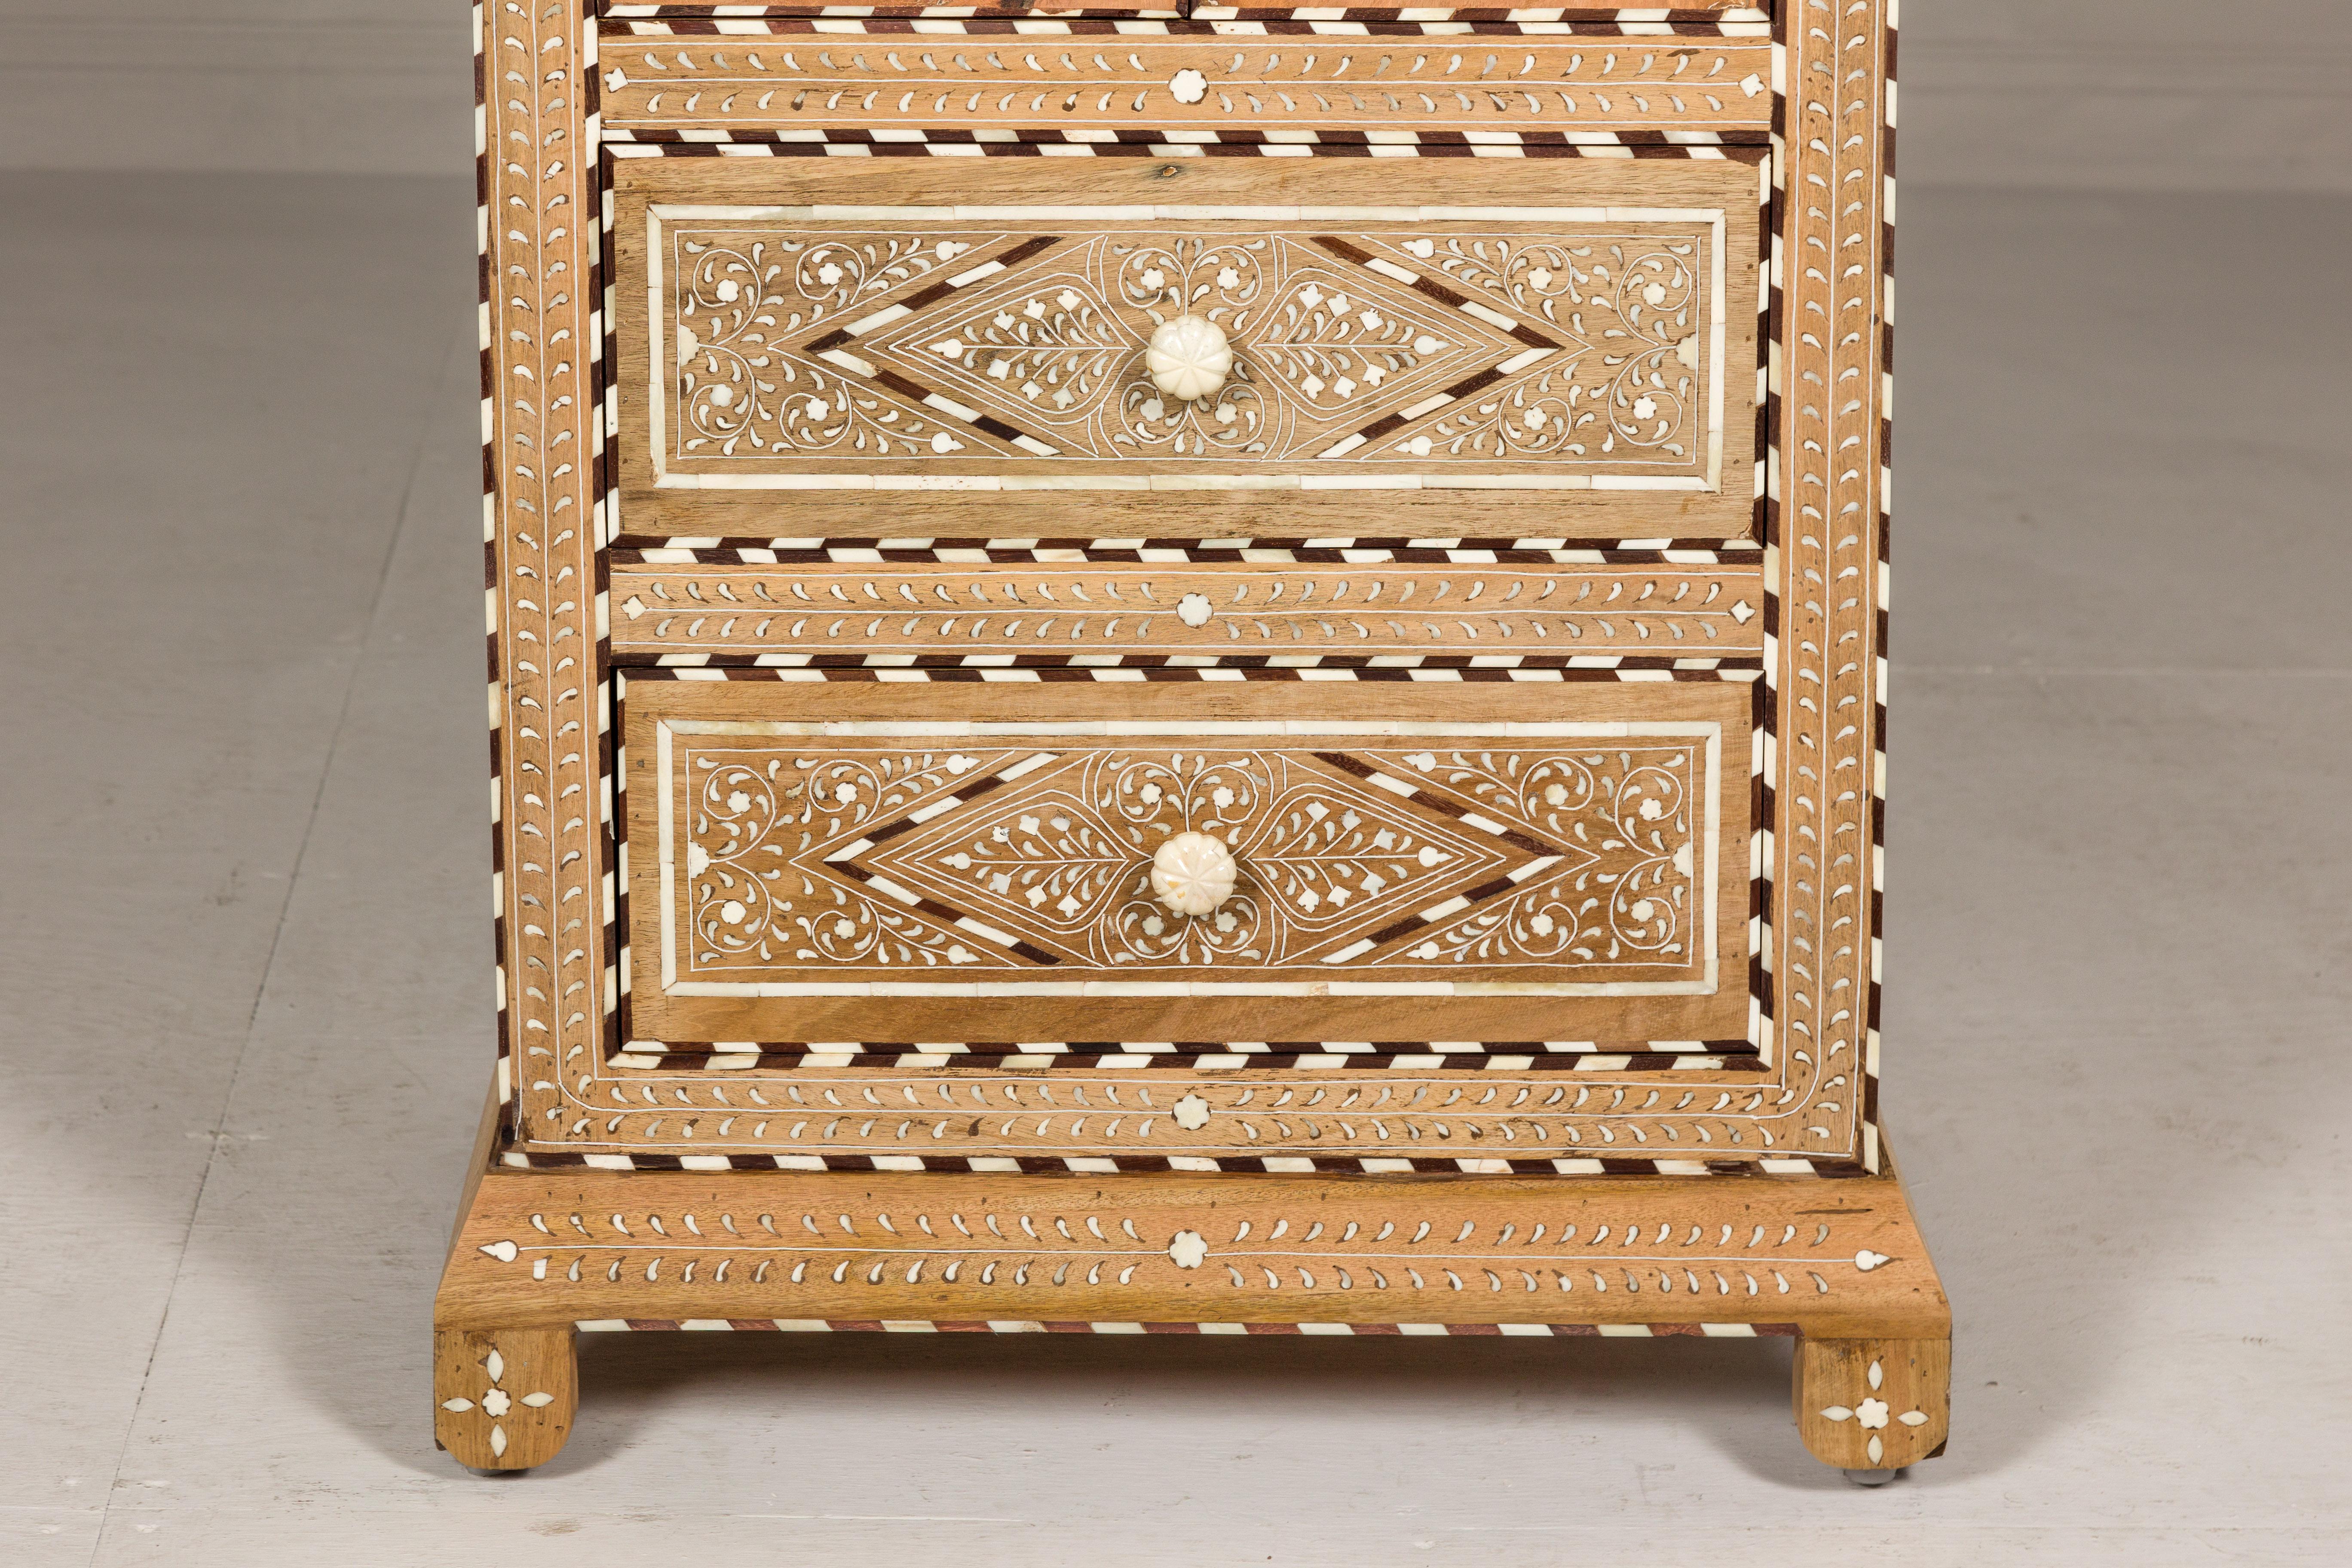 Contemporary Anglo Indian Style Narrow Cabinet with Foliage-Themed Bone Inlaid Décor For Sale